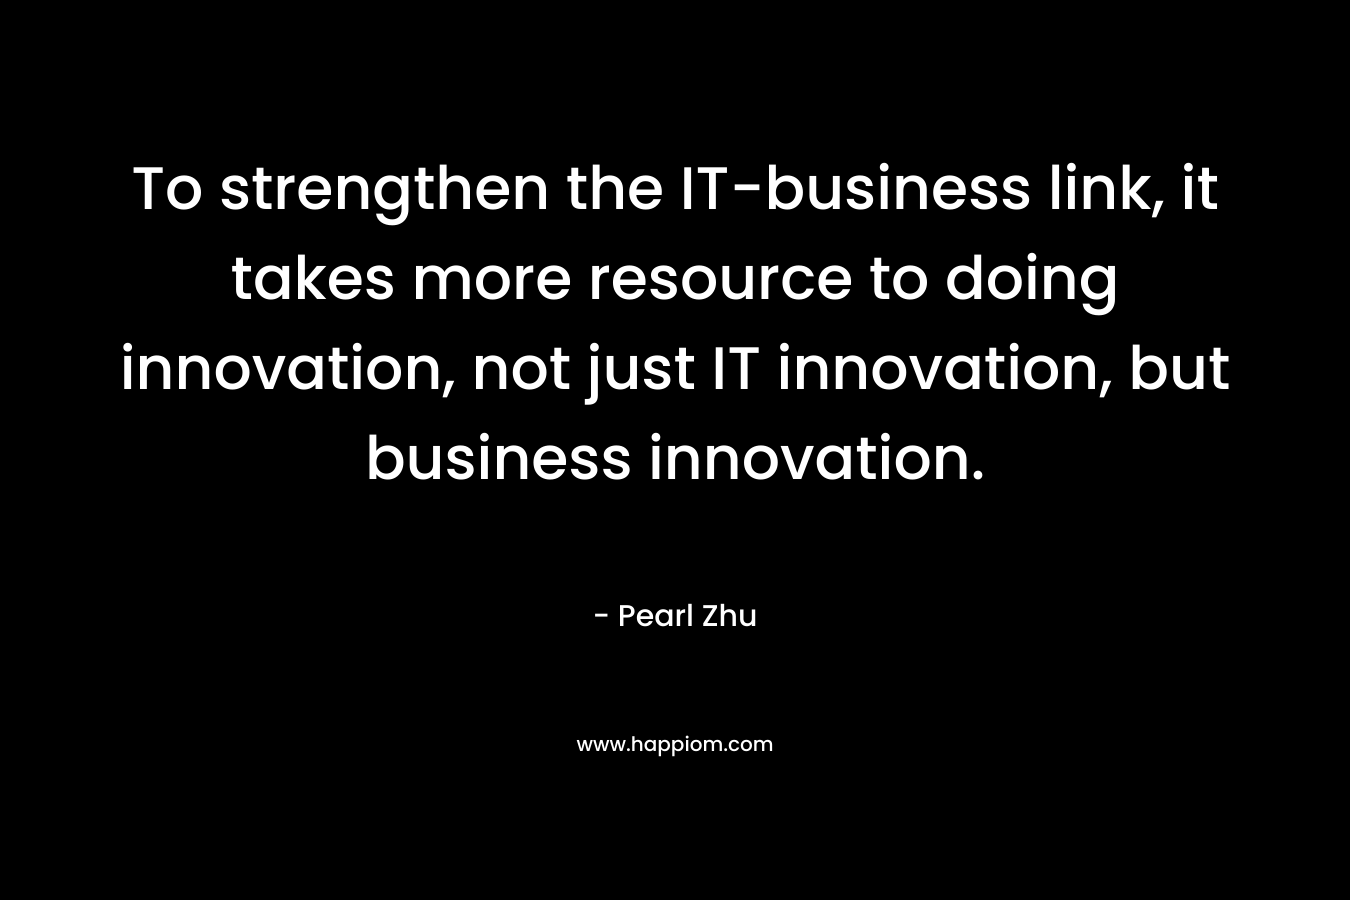 To strengthen the IT-business link, it takes more resource to doing innovation, not just IT innovation, but business innovation.